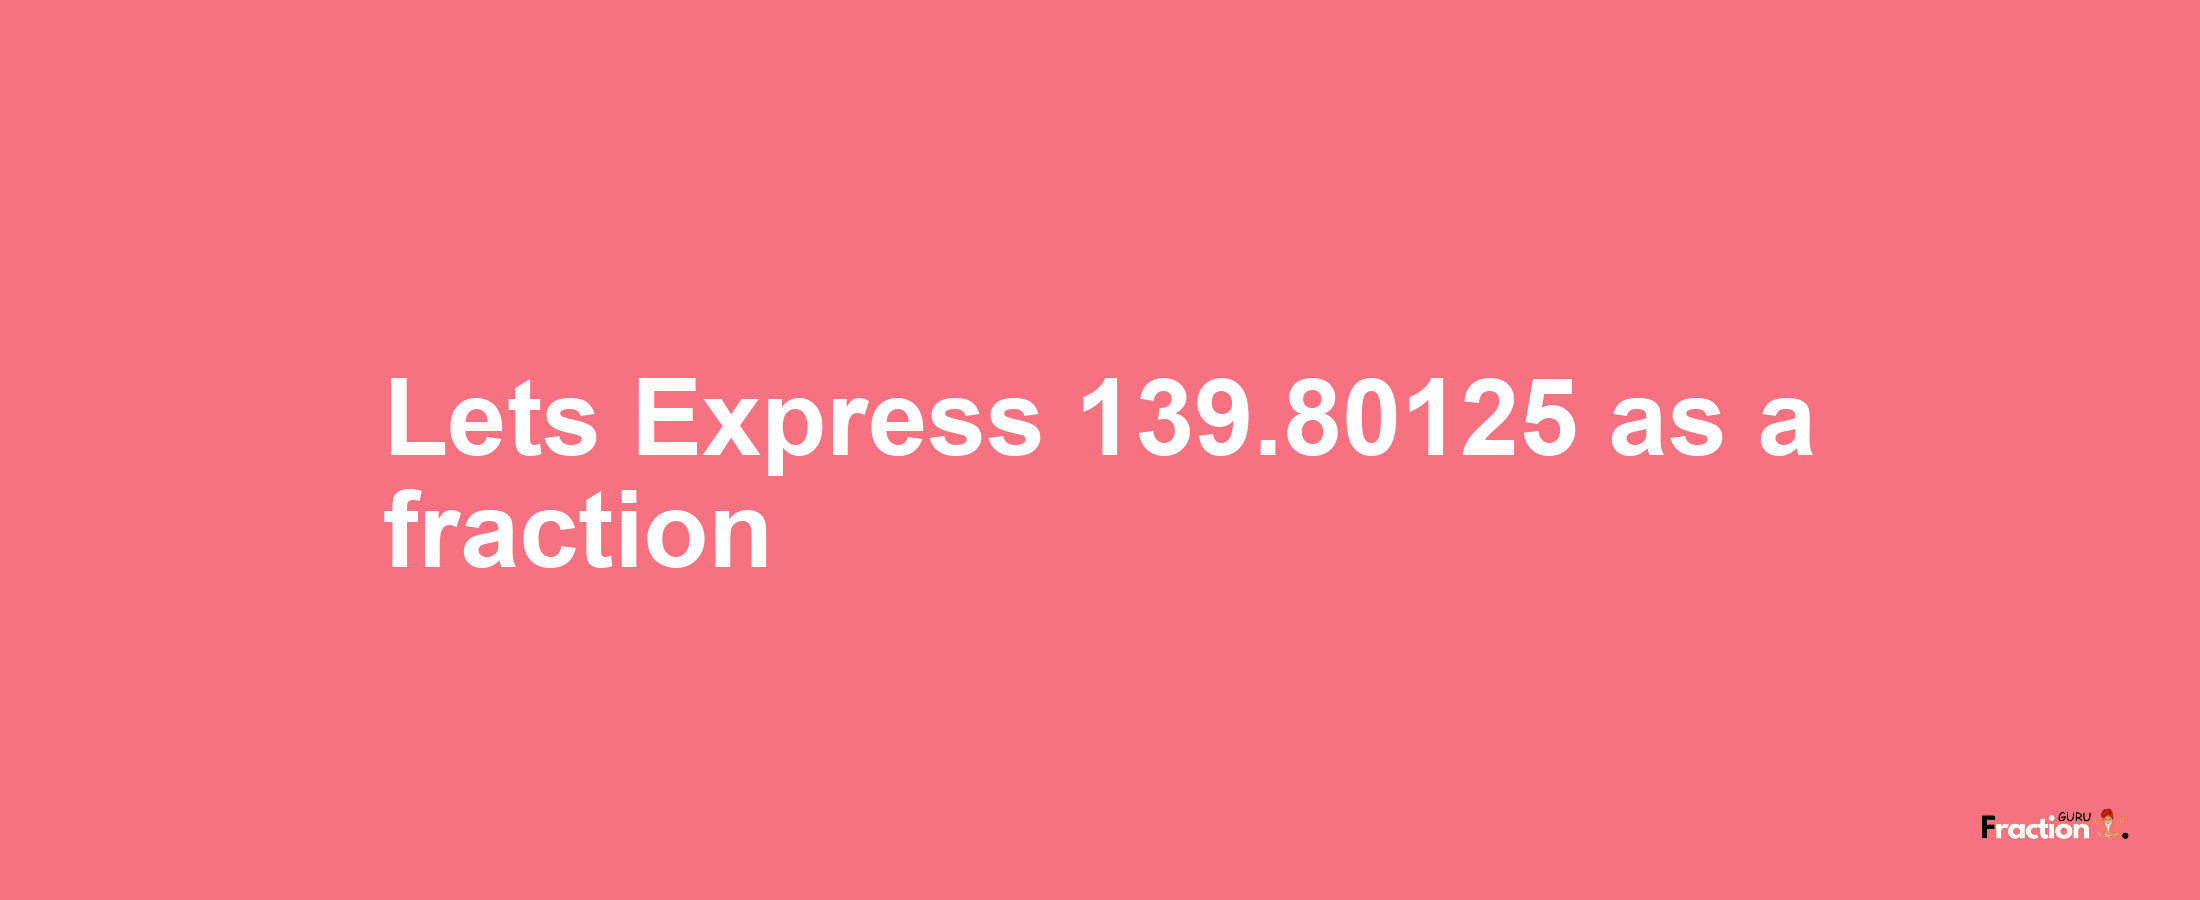 Lets Express 139.80125 as afraction